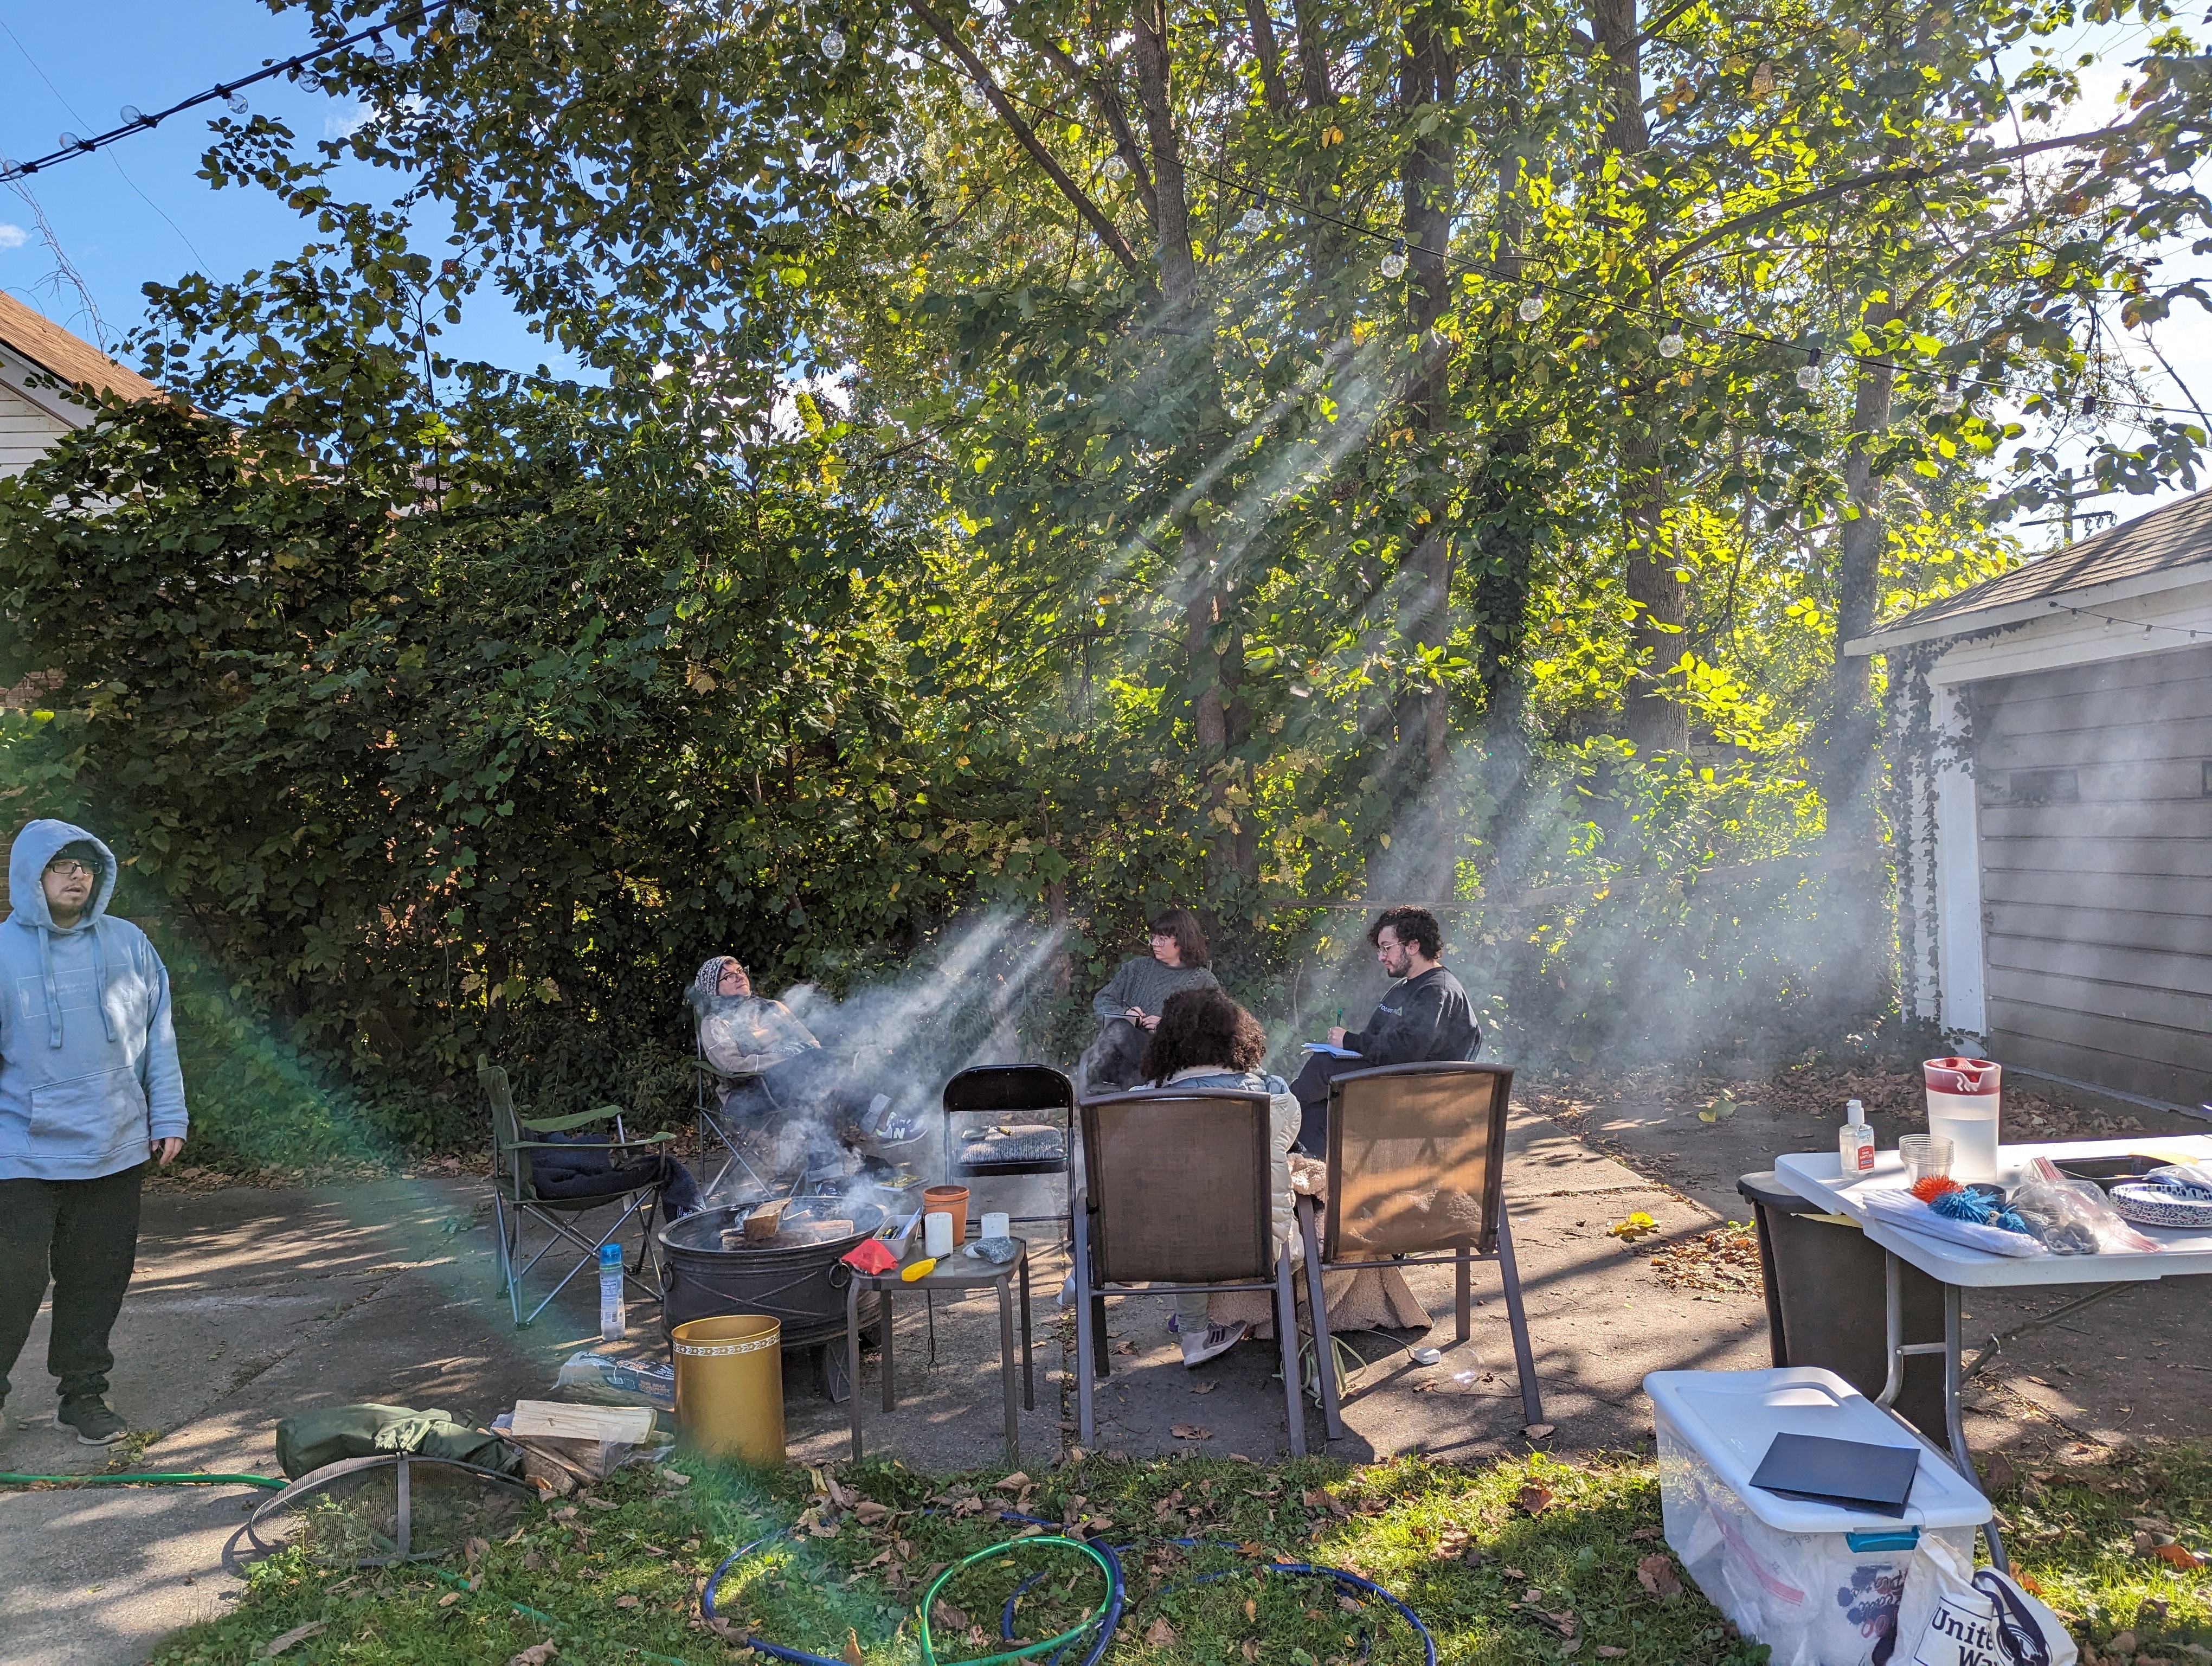 A photo of Detroit Peer Respite members sitting around a fire. The photo is taken from far away; the faces of individual members cannot be seen, but the image centers on the distinct rays of sun streaking dramatically through the trees and catching on the fire's smoke.